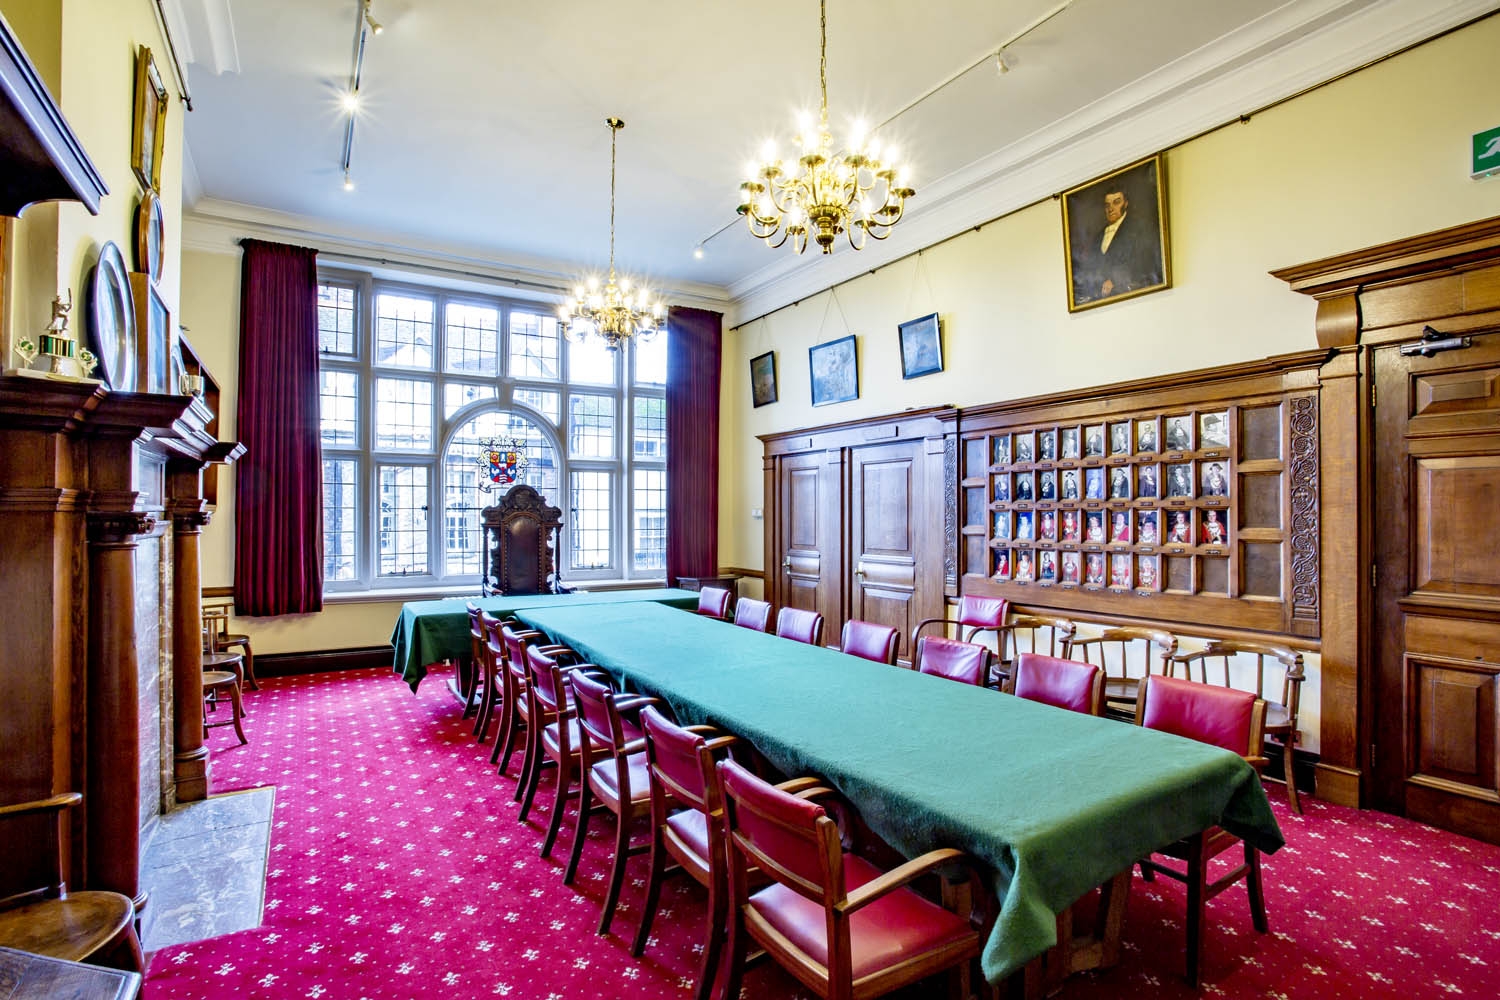 A grand, panelled room lined with portraits.  A very large window takes up one wall with a stained glass crest. A long table is lined by wooden and leather chairs